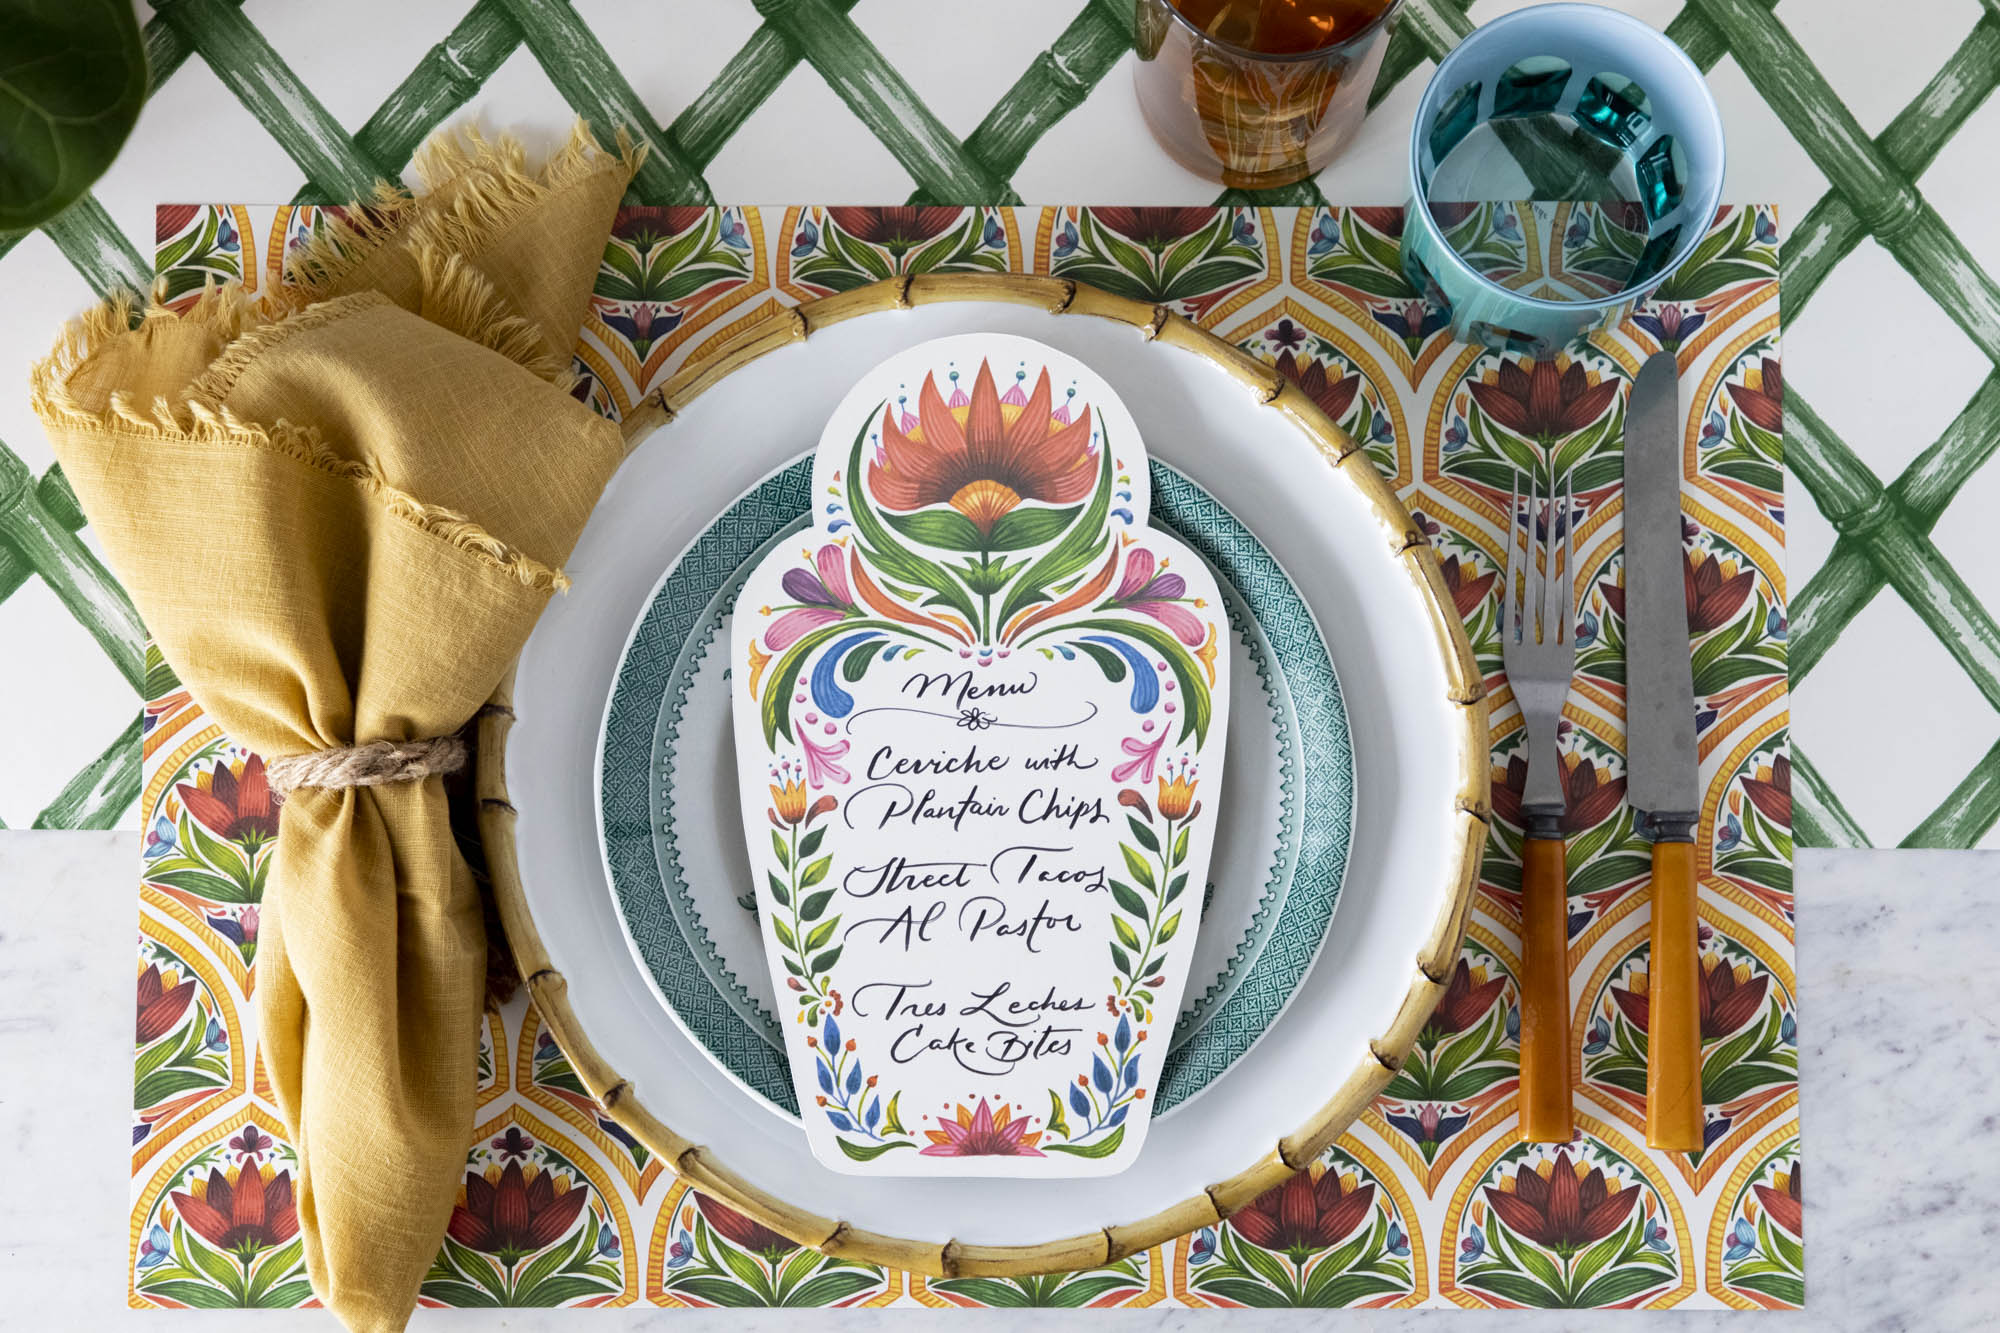 A vibrant place setting featuring a Fiesta Floral Table Card with a menu written on it in beautiful script resting on the plate, from above.